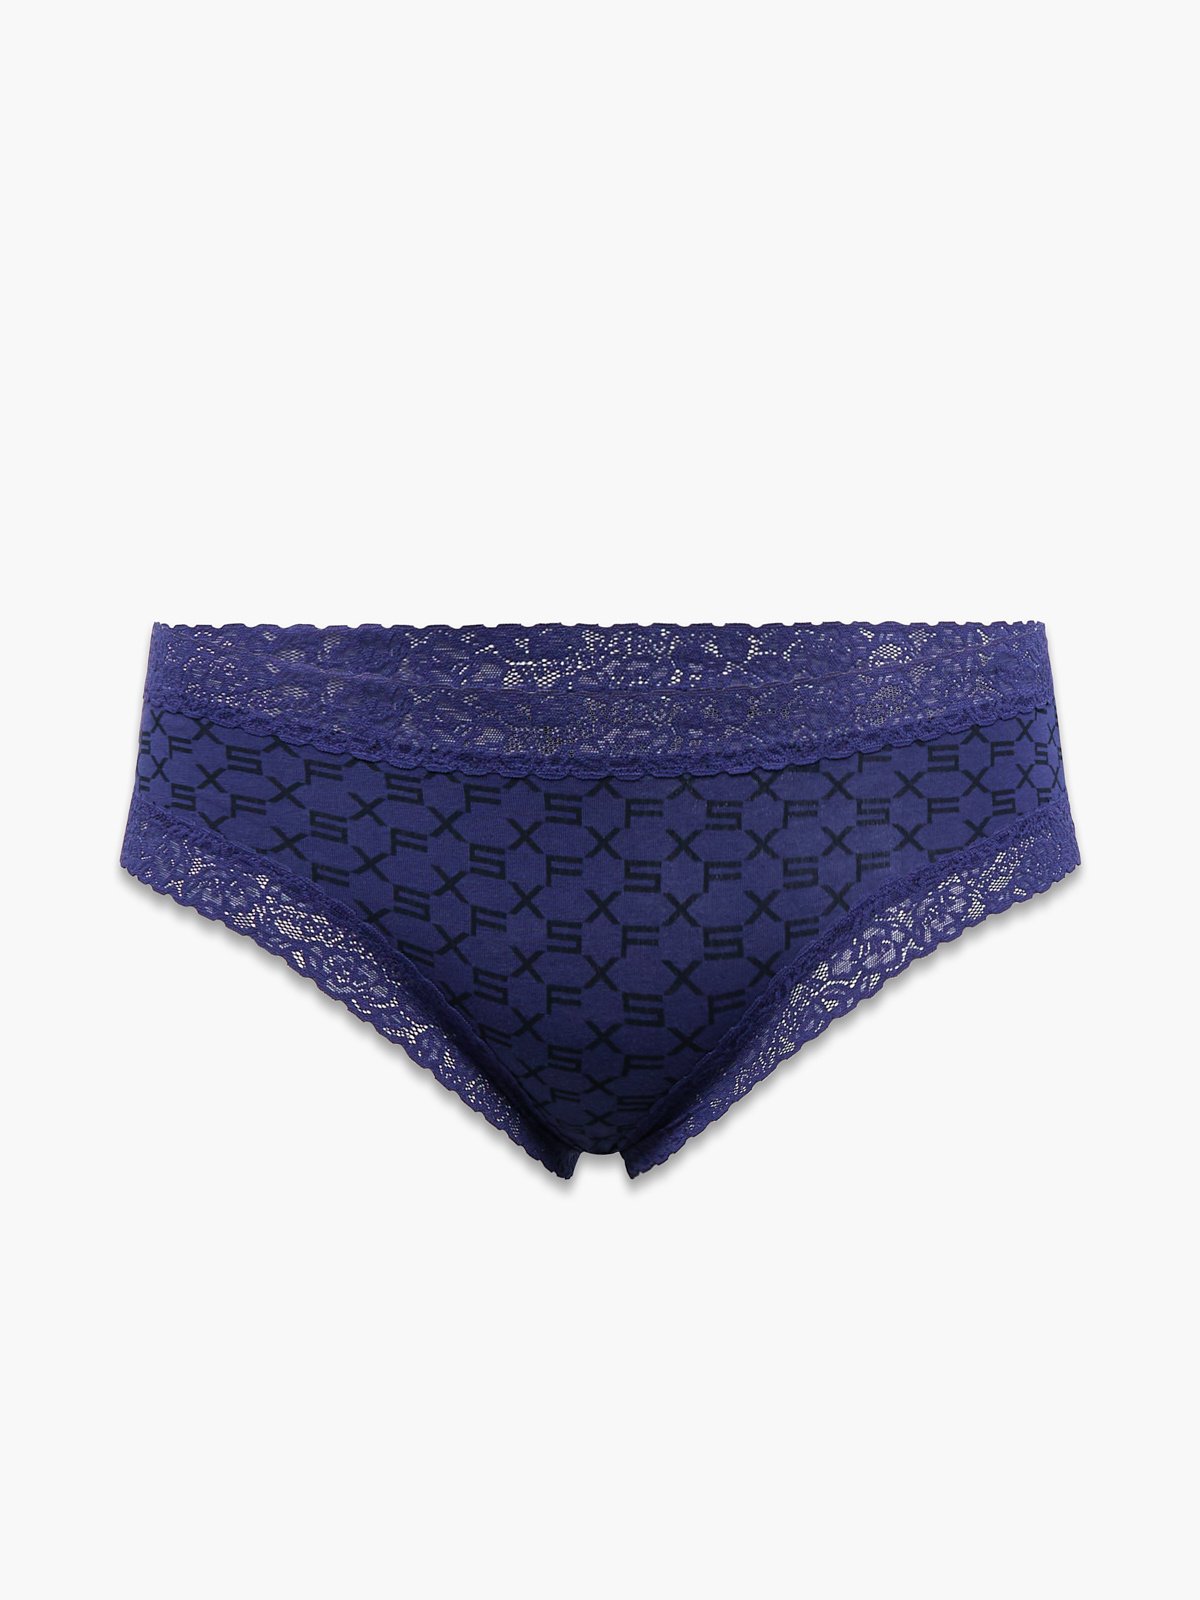 Cotton Essentials Lace-Trim Cheeky Panty in Blue & Purple